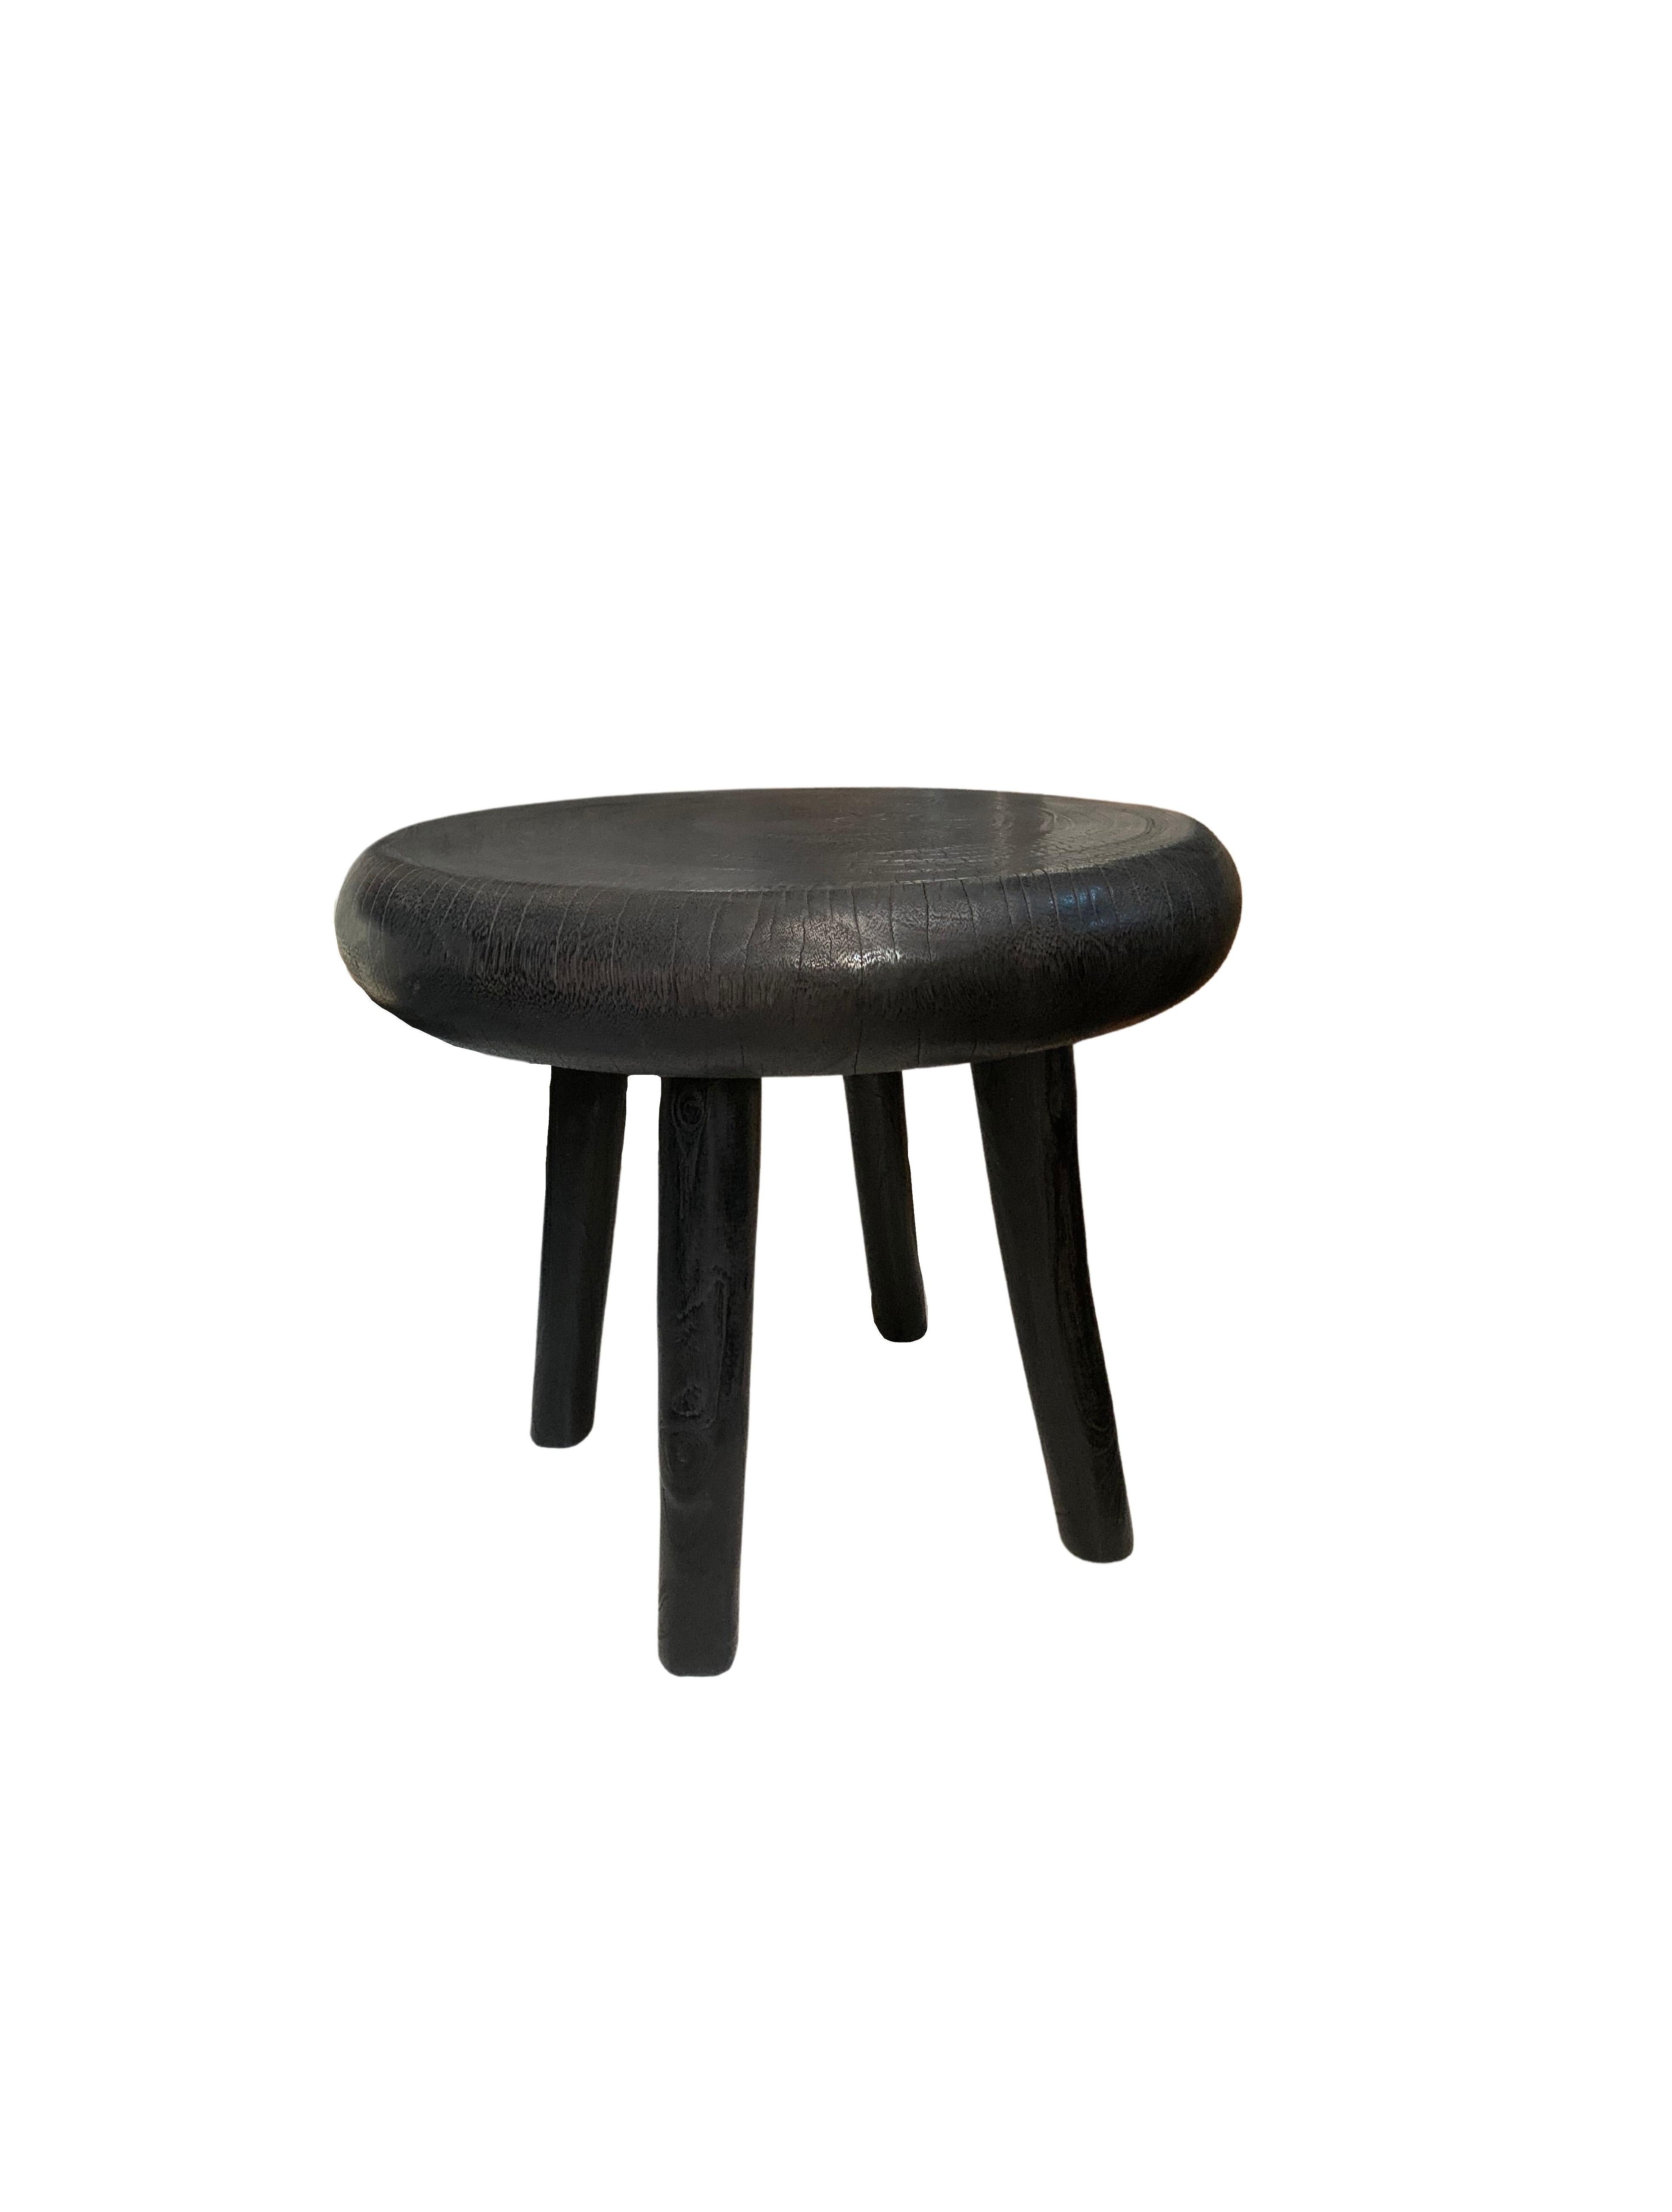 Indonesian Sculptural Side Table Crafted from Mango Wood & Burnt, Black Finish For Sale